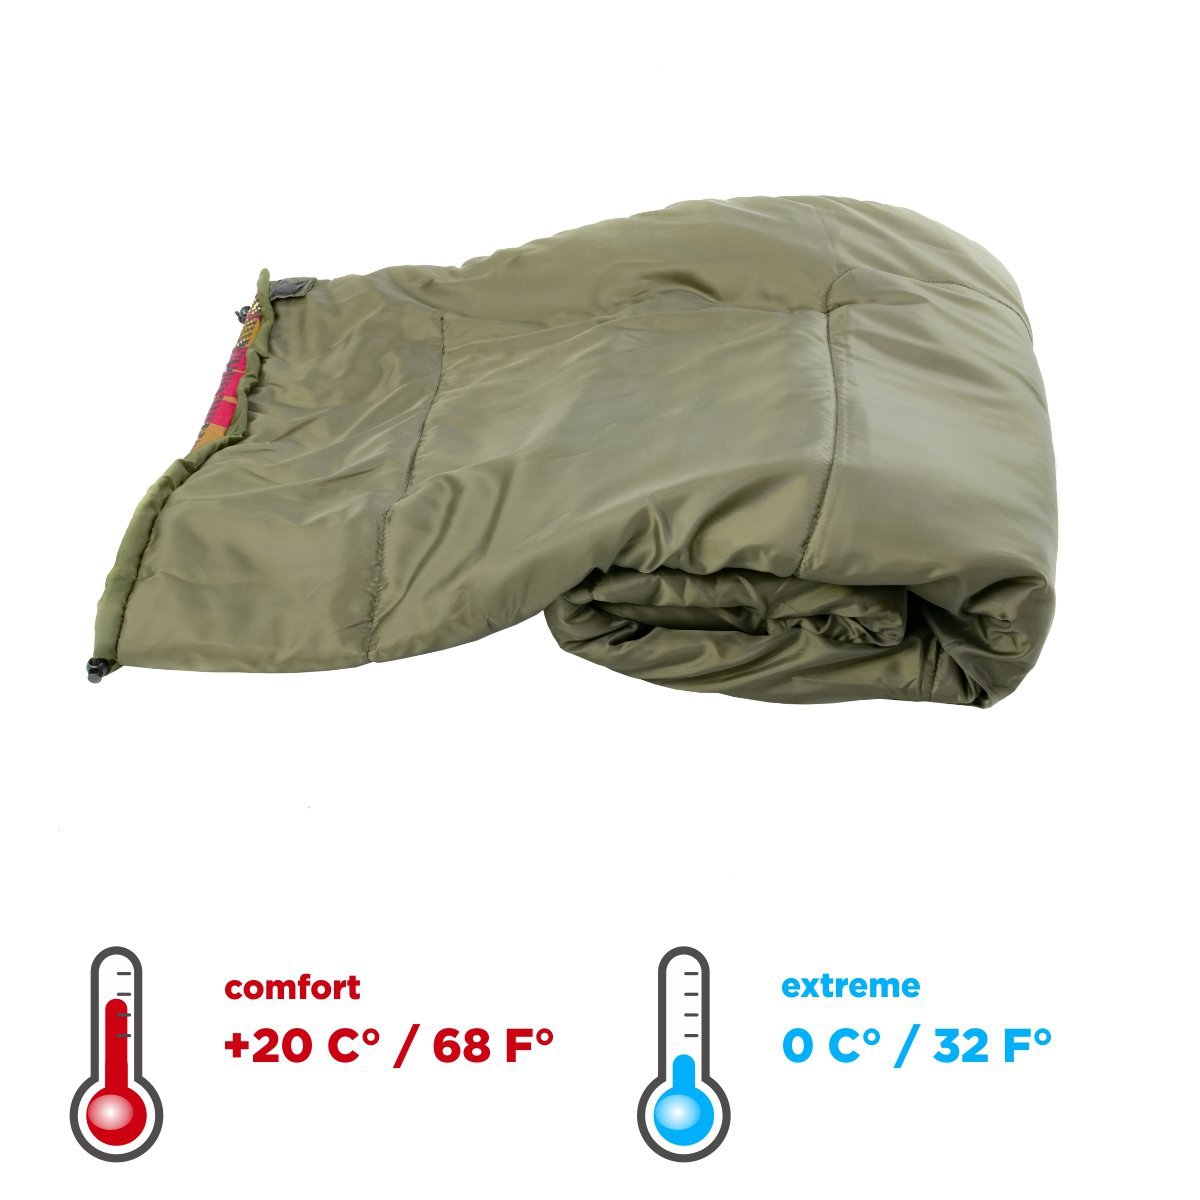 TRAVEL 185/70/200 Lightweight Synthetic Cotton Lined Camping Sleeping Bag